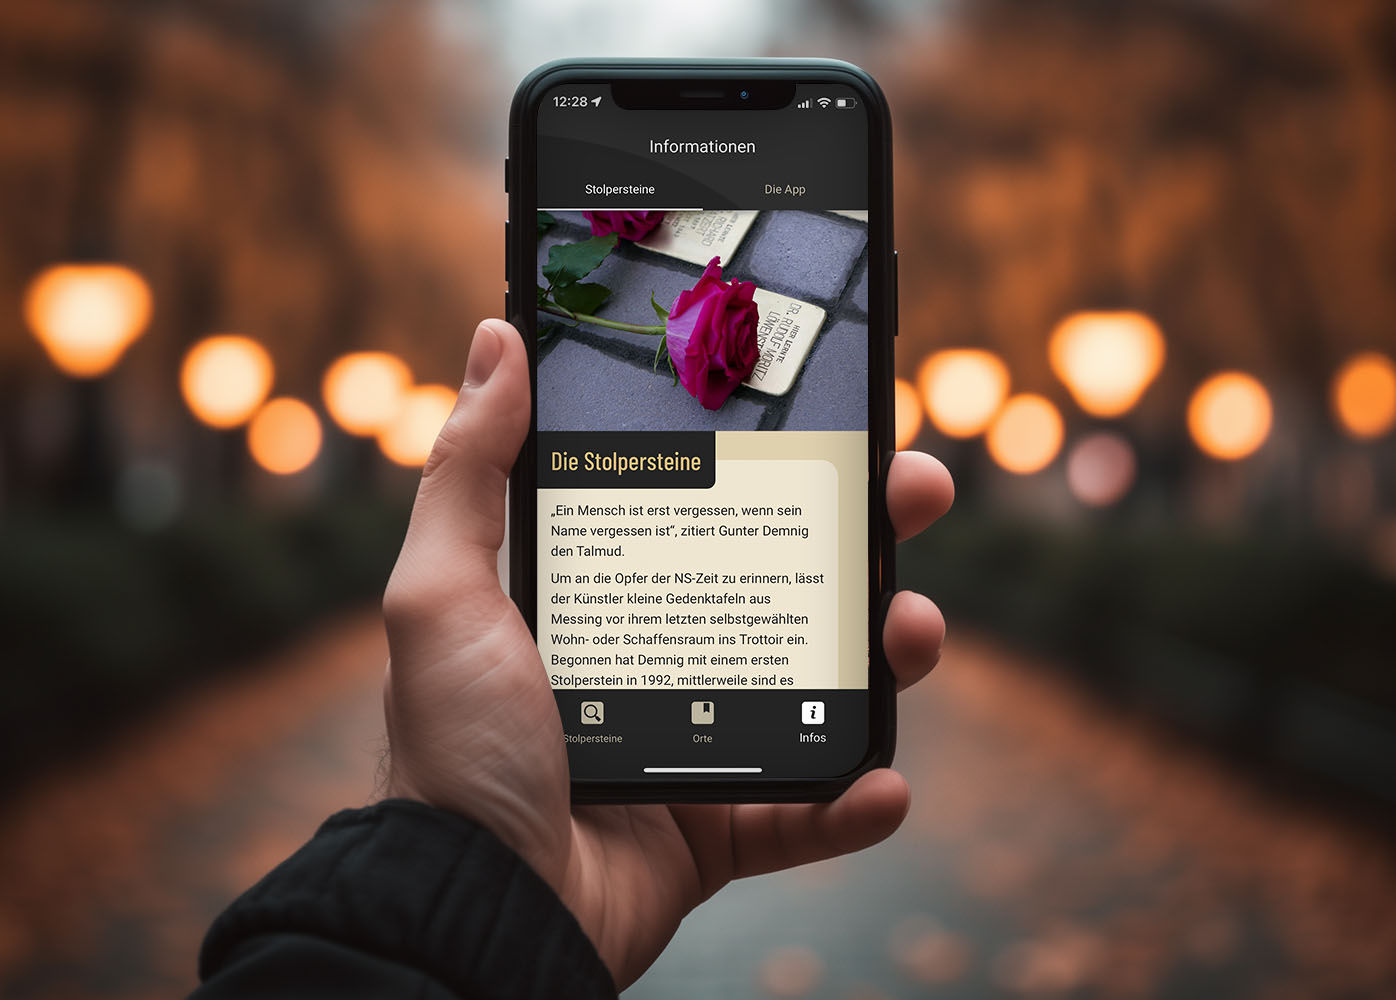 A hand holds a smartphone in front of a street background. On it is a picture of a stumbling stone with a red rose on it and an explanatory text about the app.